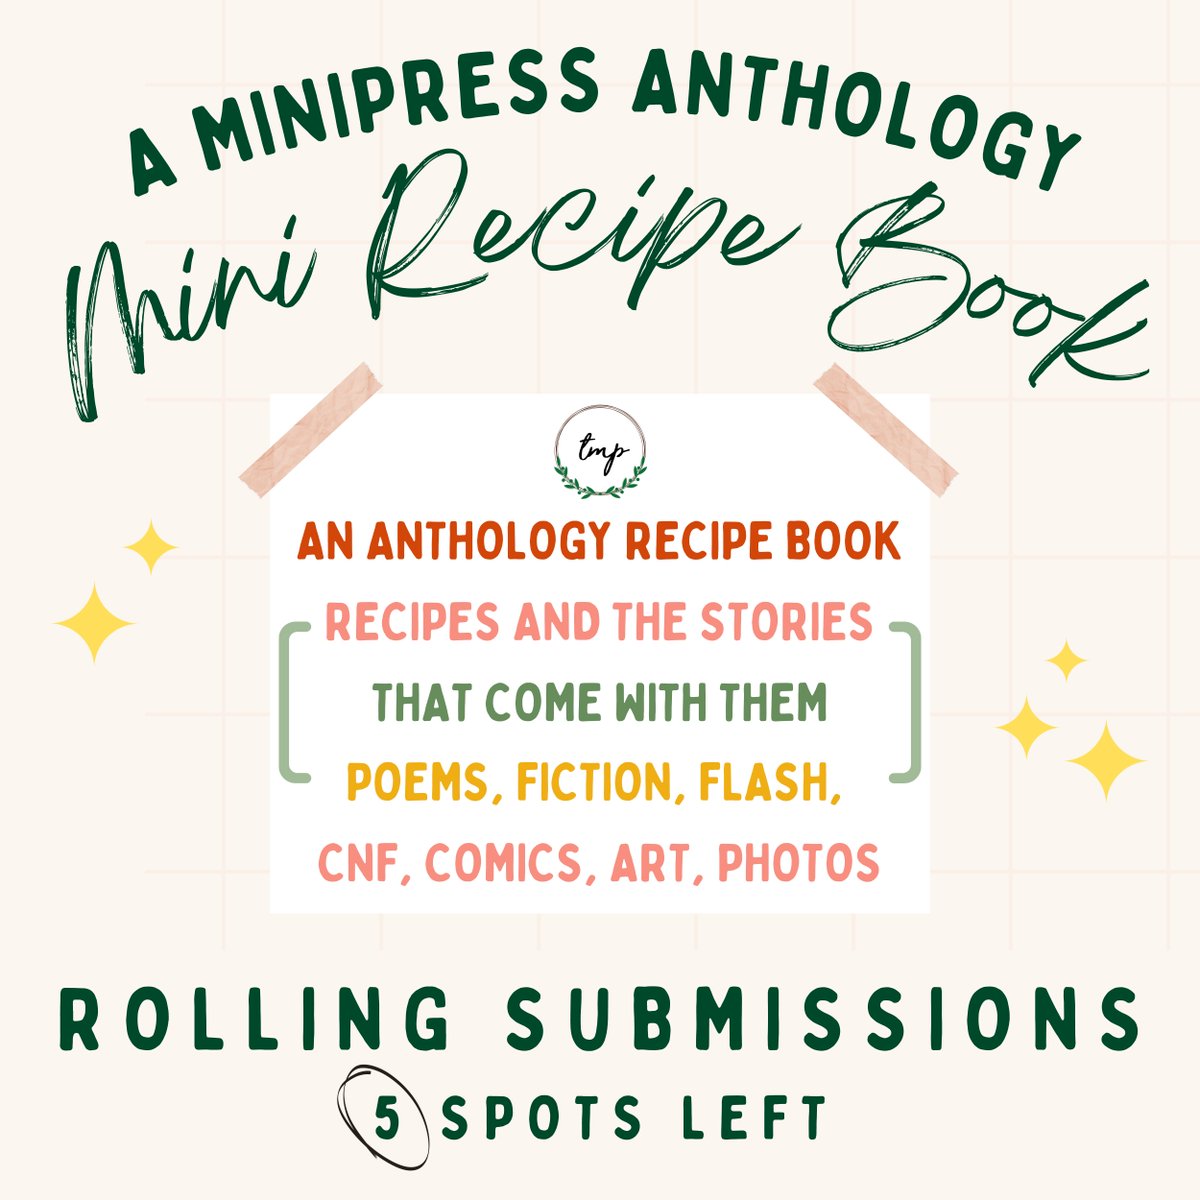 There's 5 spots left in our MiniPress Recipe Anthology. We've been researching set dressings to create the perfect feel for the antho! It's starting to feel real!

Get your recipes and stories in today! theminisonproject.com/minipress

#MiniPress #RecipeAnthology #FoodWriting